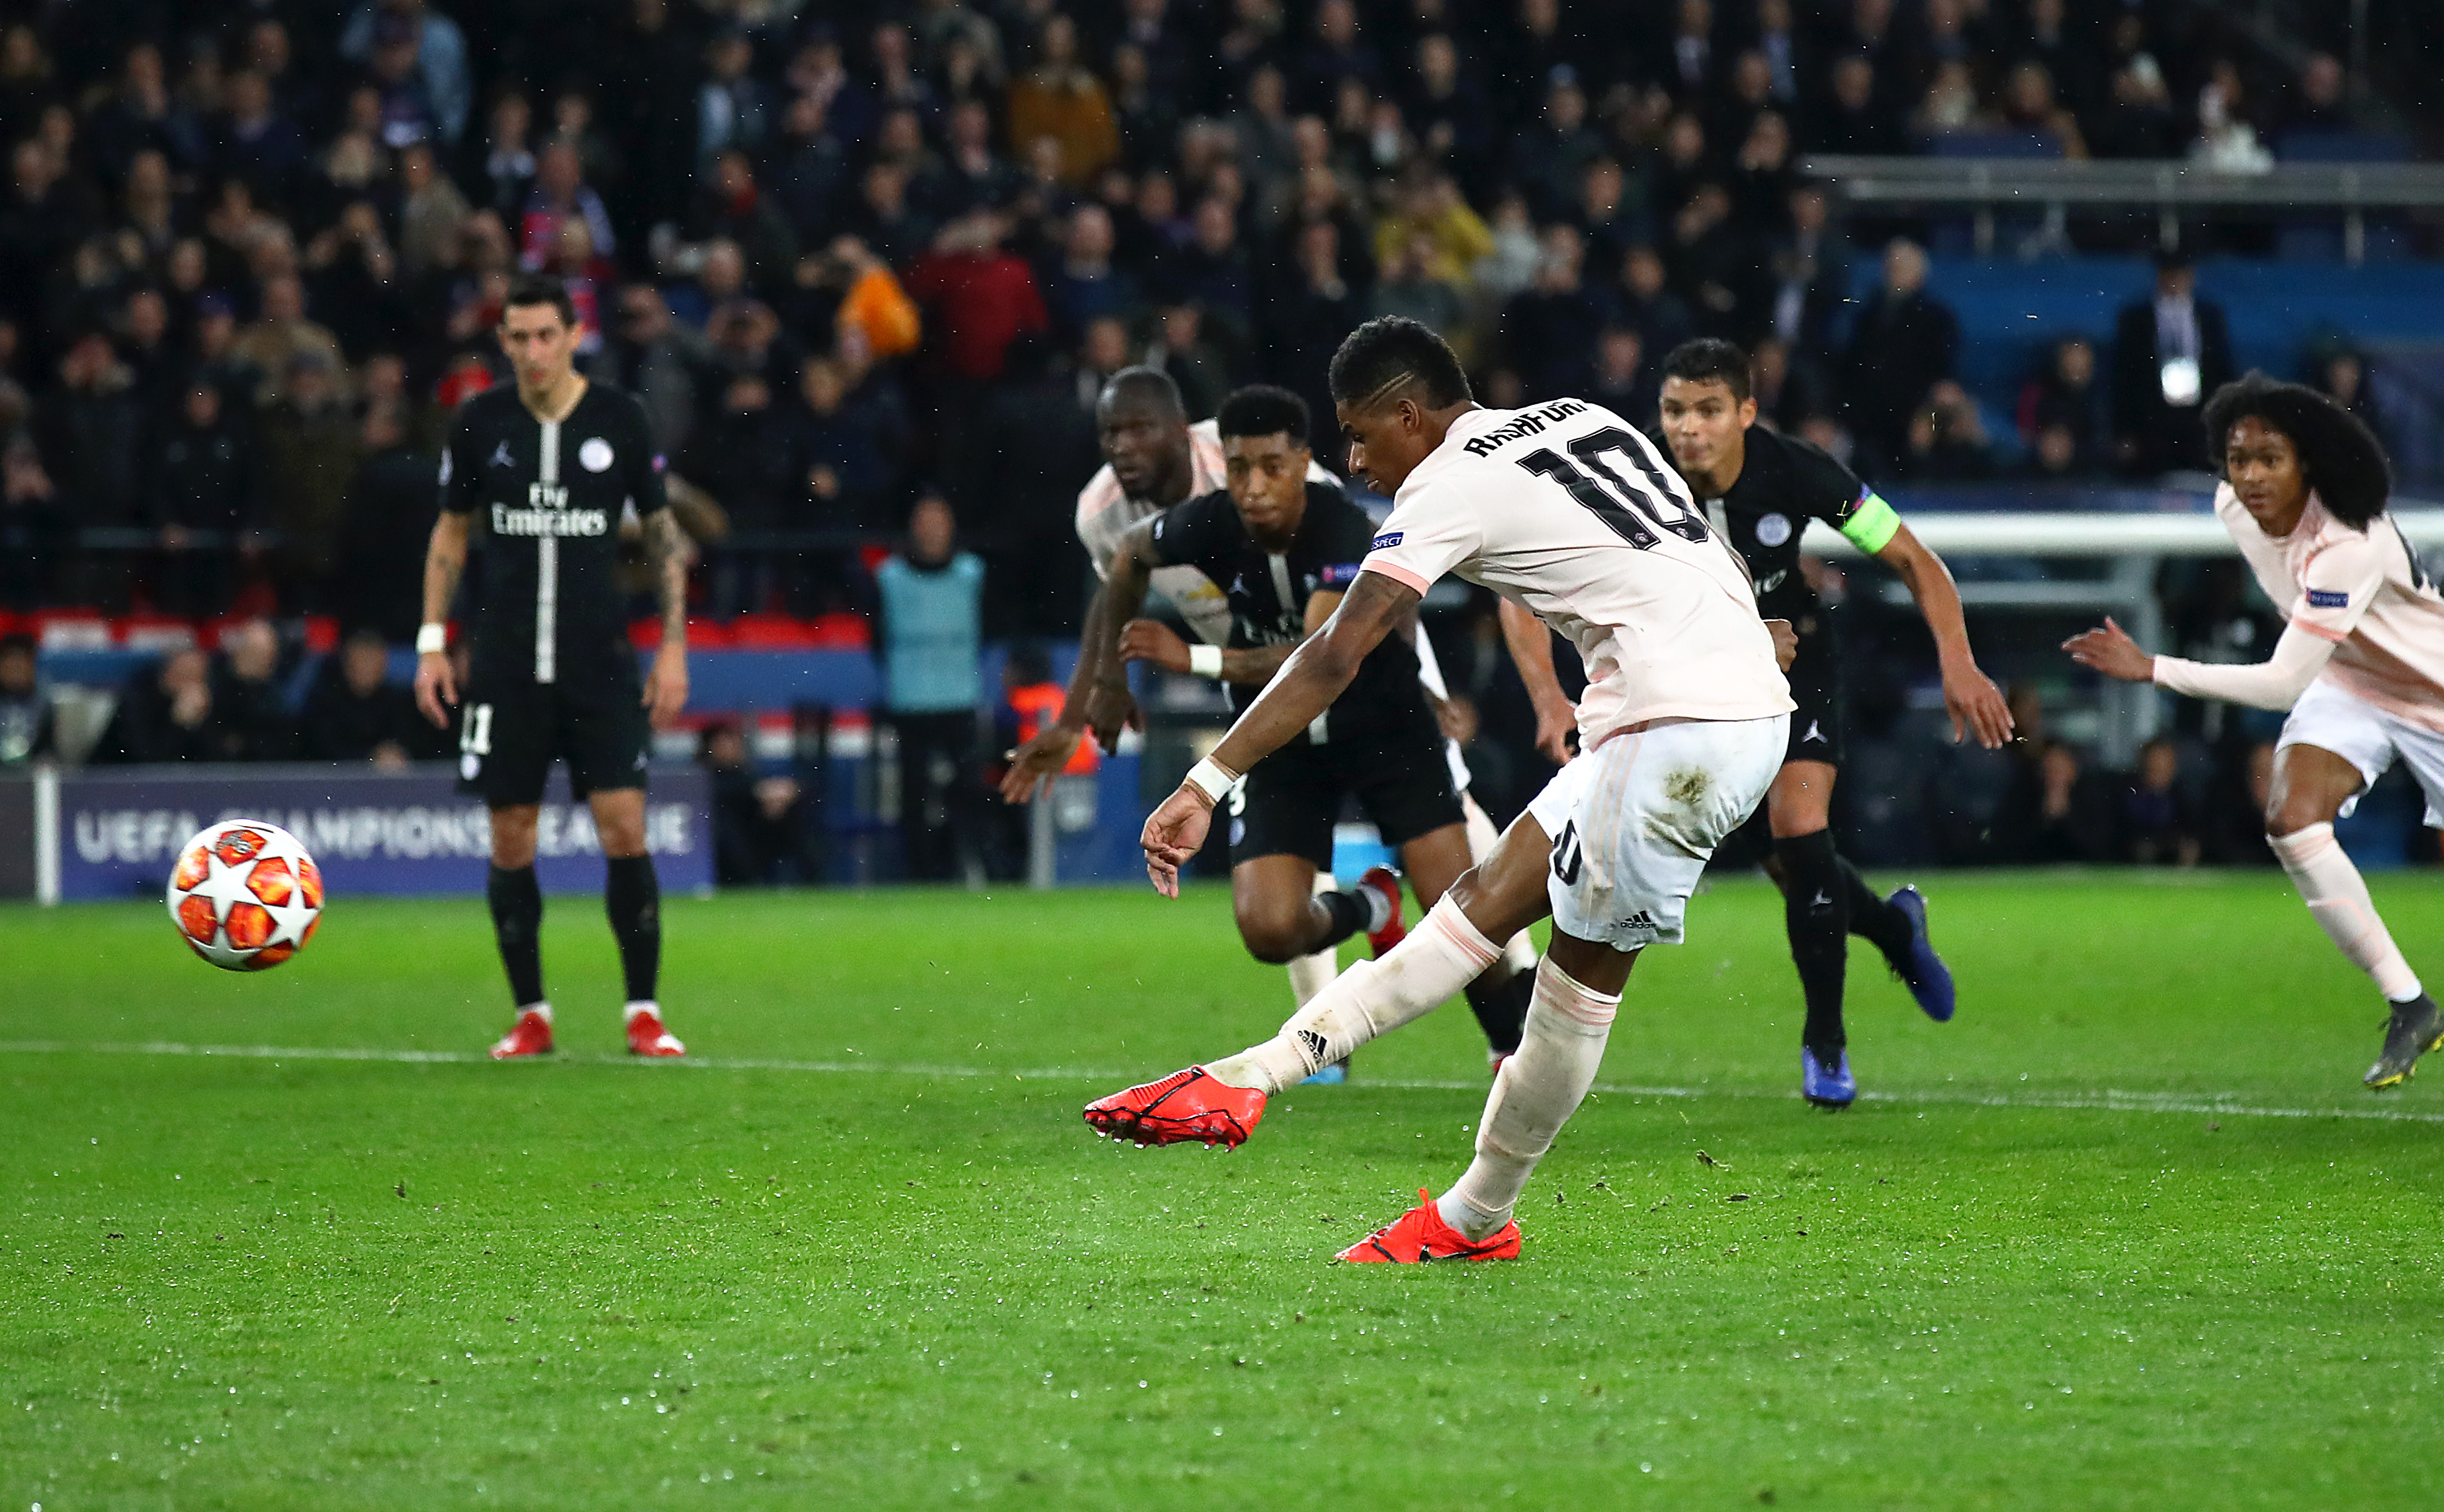 PARIS, FRANCE - MARCH 06:  Marcus Rashford of Manchester United shoots and scores his first competitive penalty for Manchester United during the UEFA Champions League Round of 16 Second Leg match between Paris Saint-Germain and Manchester United at Parc des Princes on March 06, 2019 in Paris, France. (Photo by Julian Finney/Getty Images)